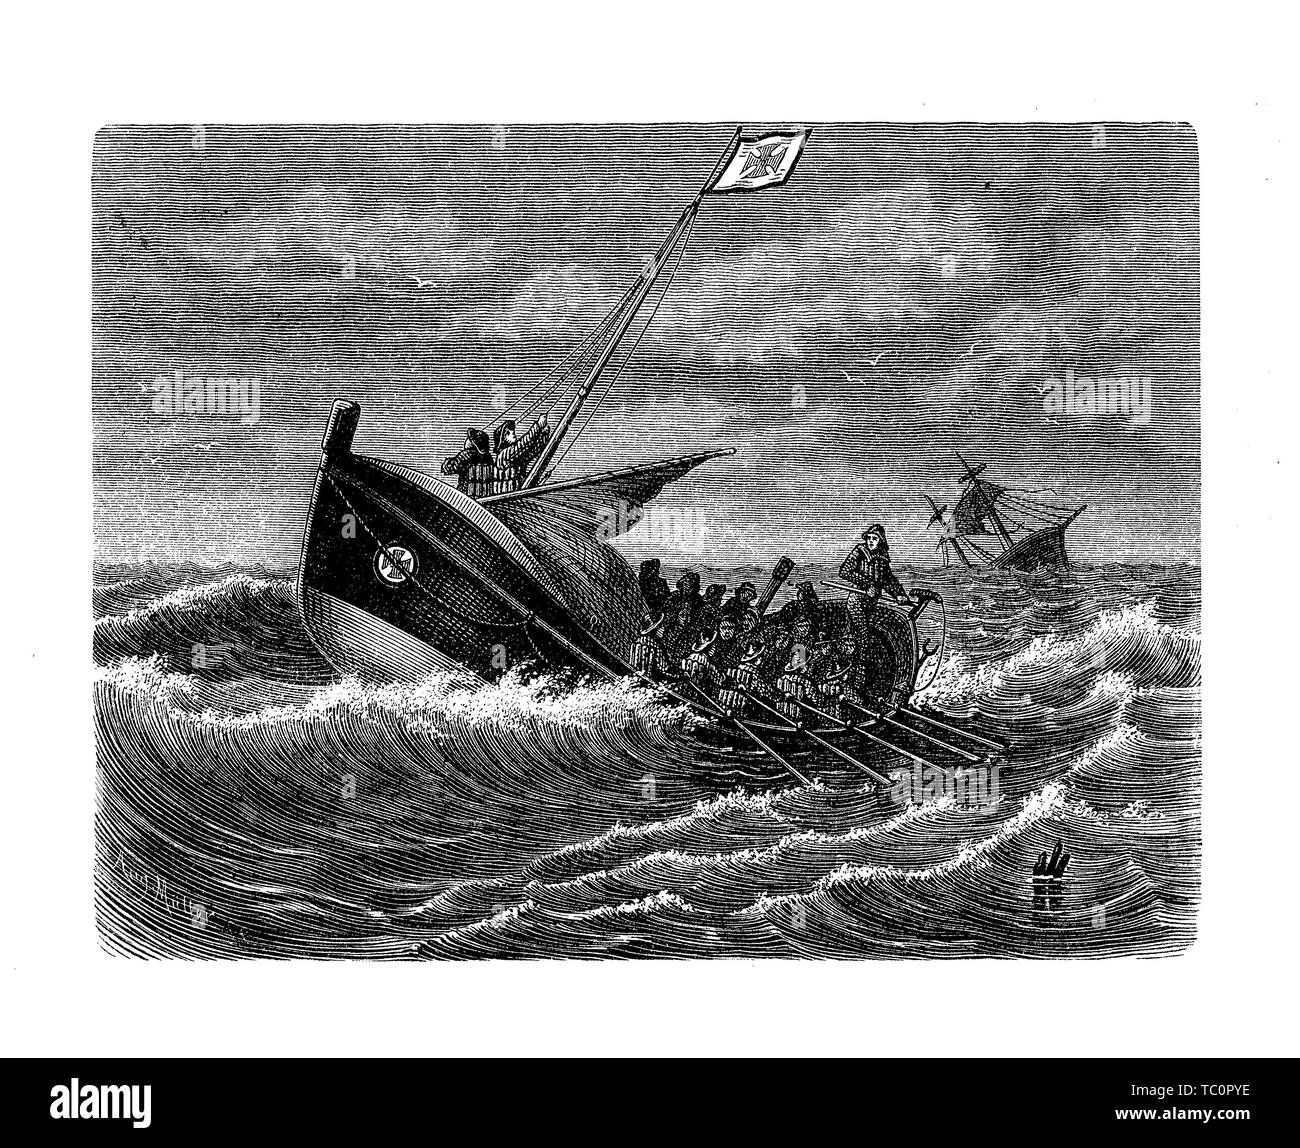 Ship sinking people Cut Out Stock Images & Pictures - Alamy